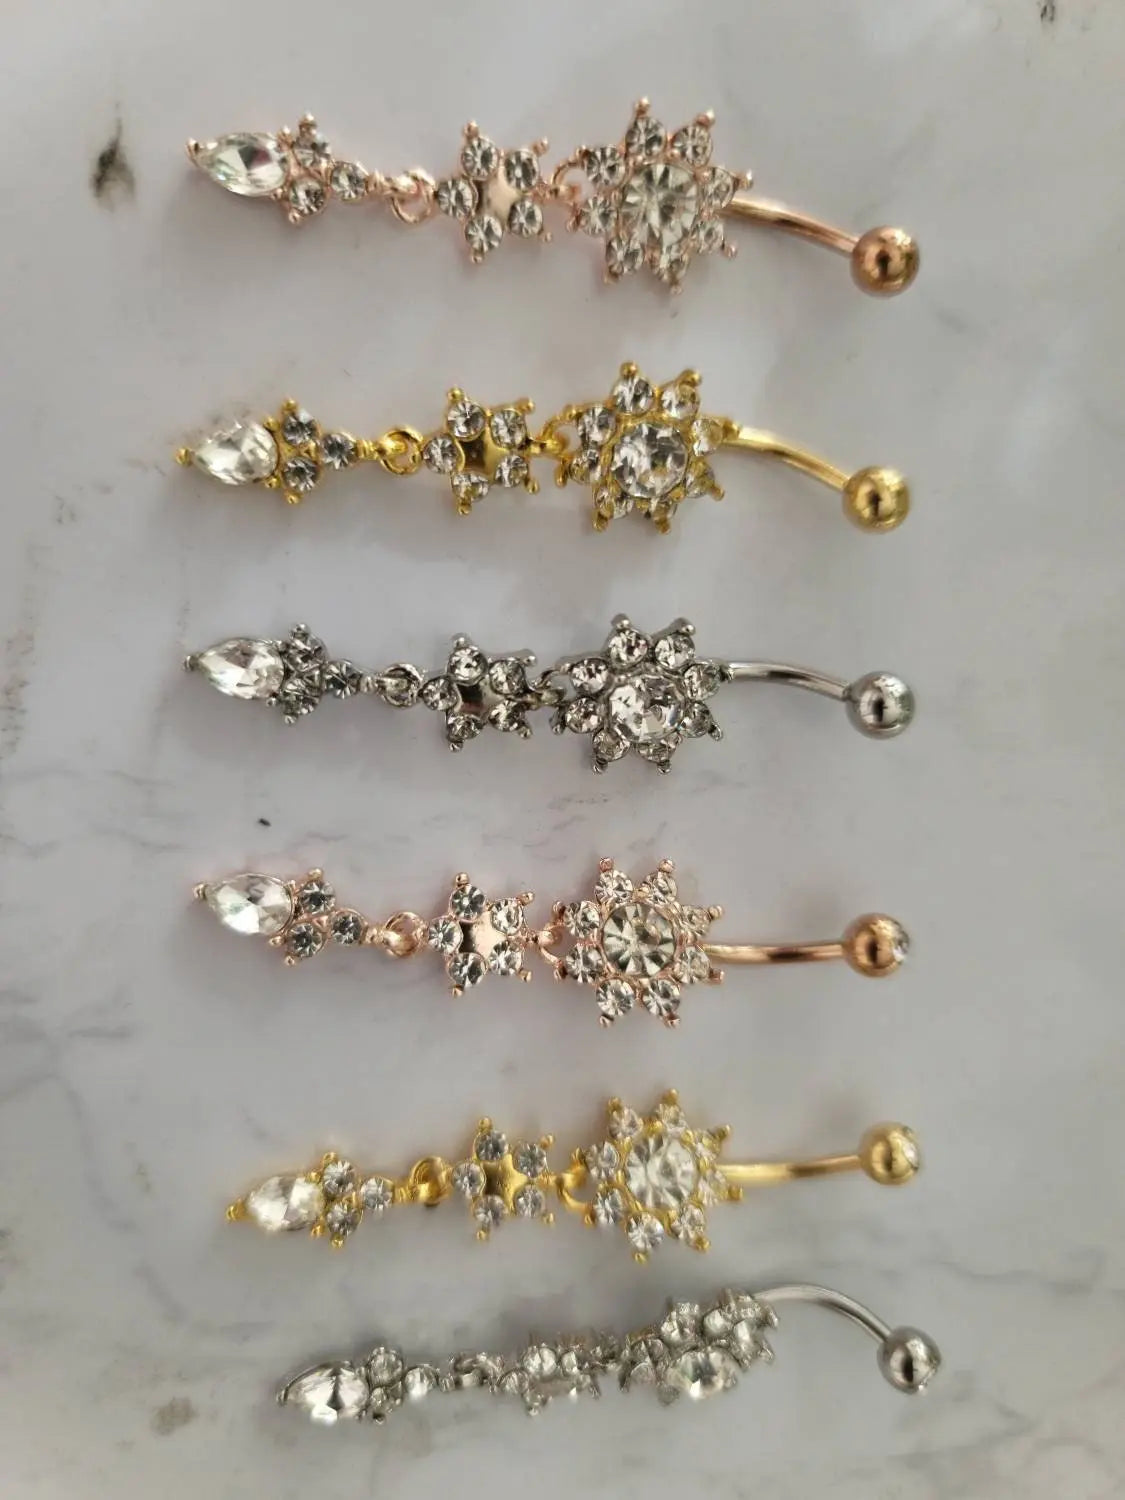 6 pc Belly Piercings Gold, Rose Gold and Silver Flower Belly Ring, Belly Dancing jewelry, surgical steel Dangle, Drill dangle - JettsJewelers